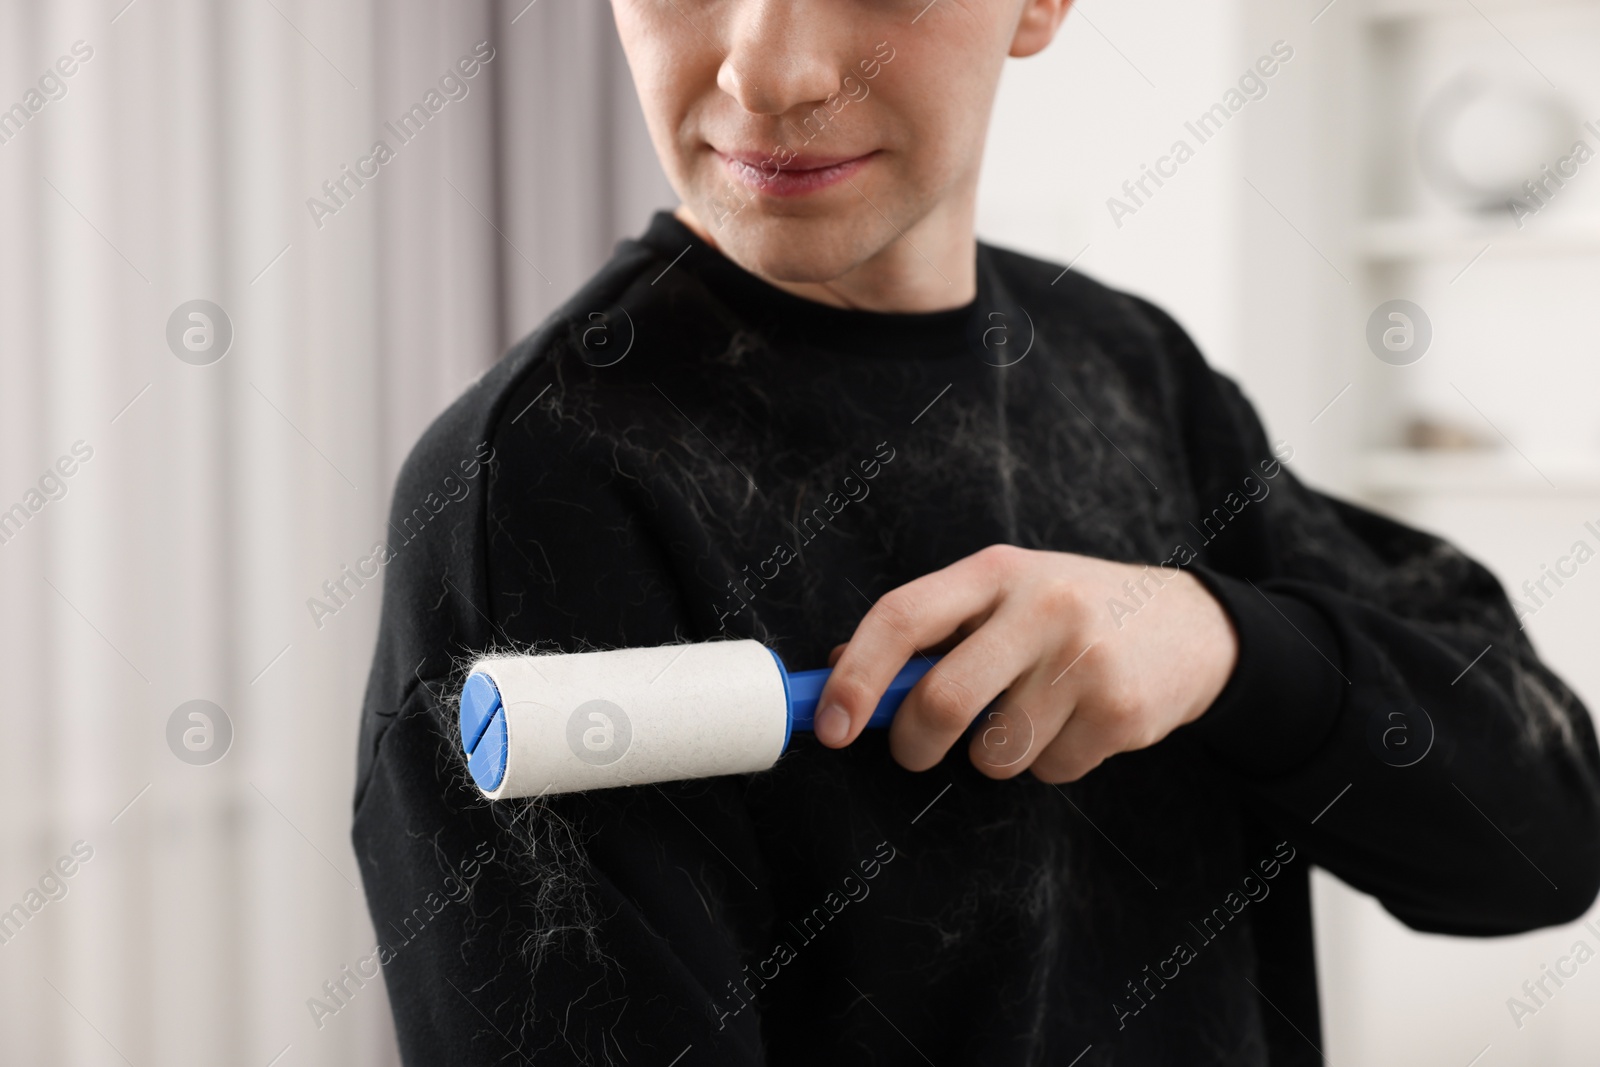 Photo of Pet shedding. Man with lint roller removing dog's hair from sweater at home, closeup